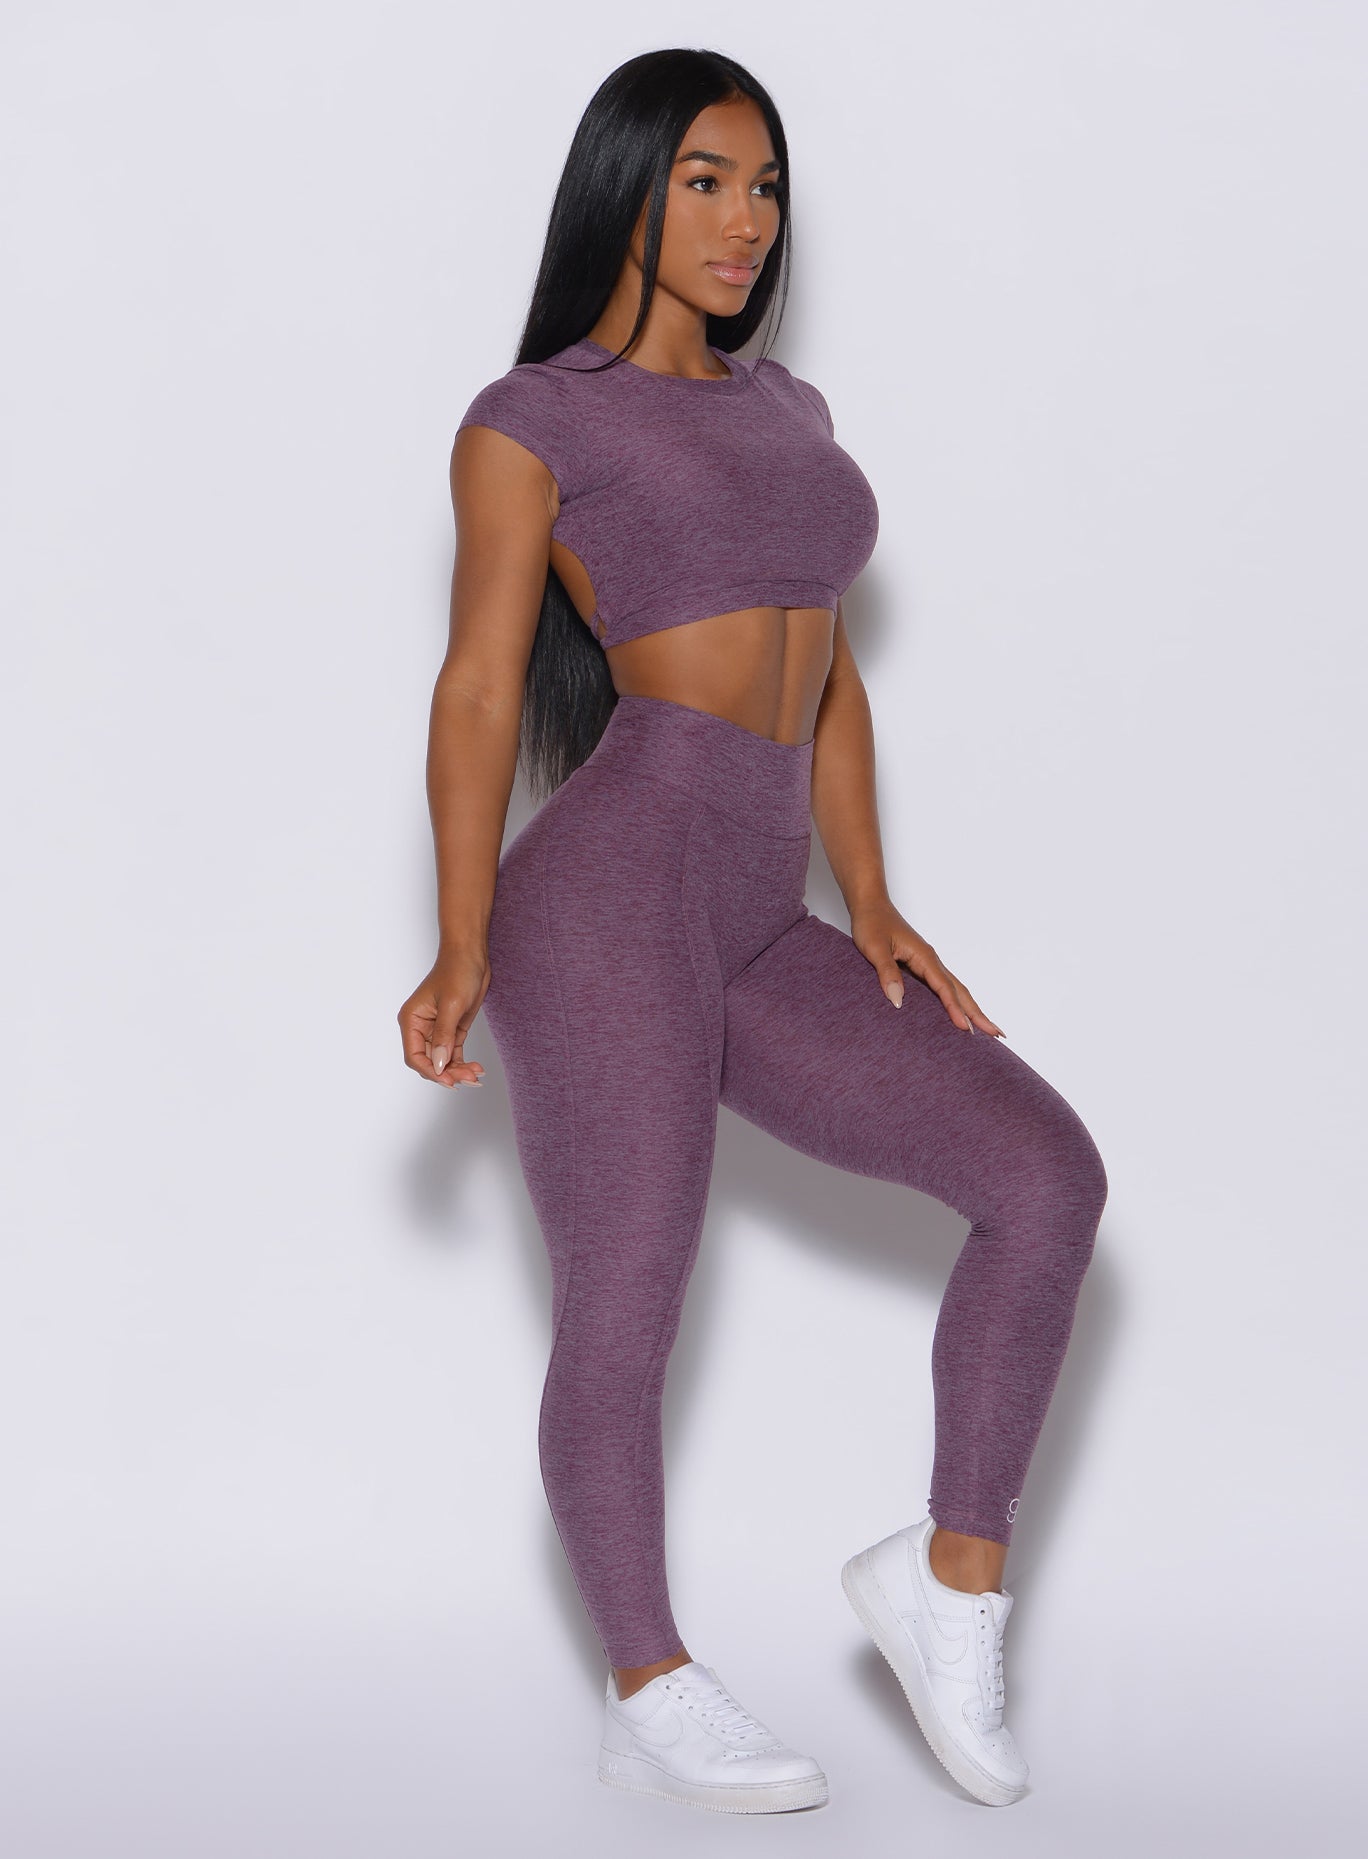 Right side profile view of a model angled slightly to her right wearing our cloud leggings in regal purple color and a matching sports bra